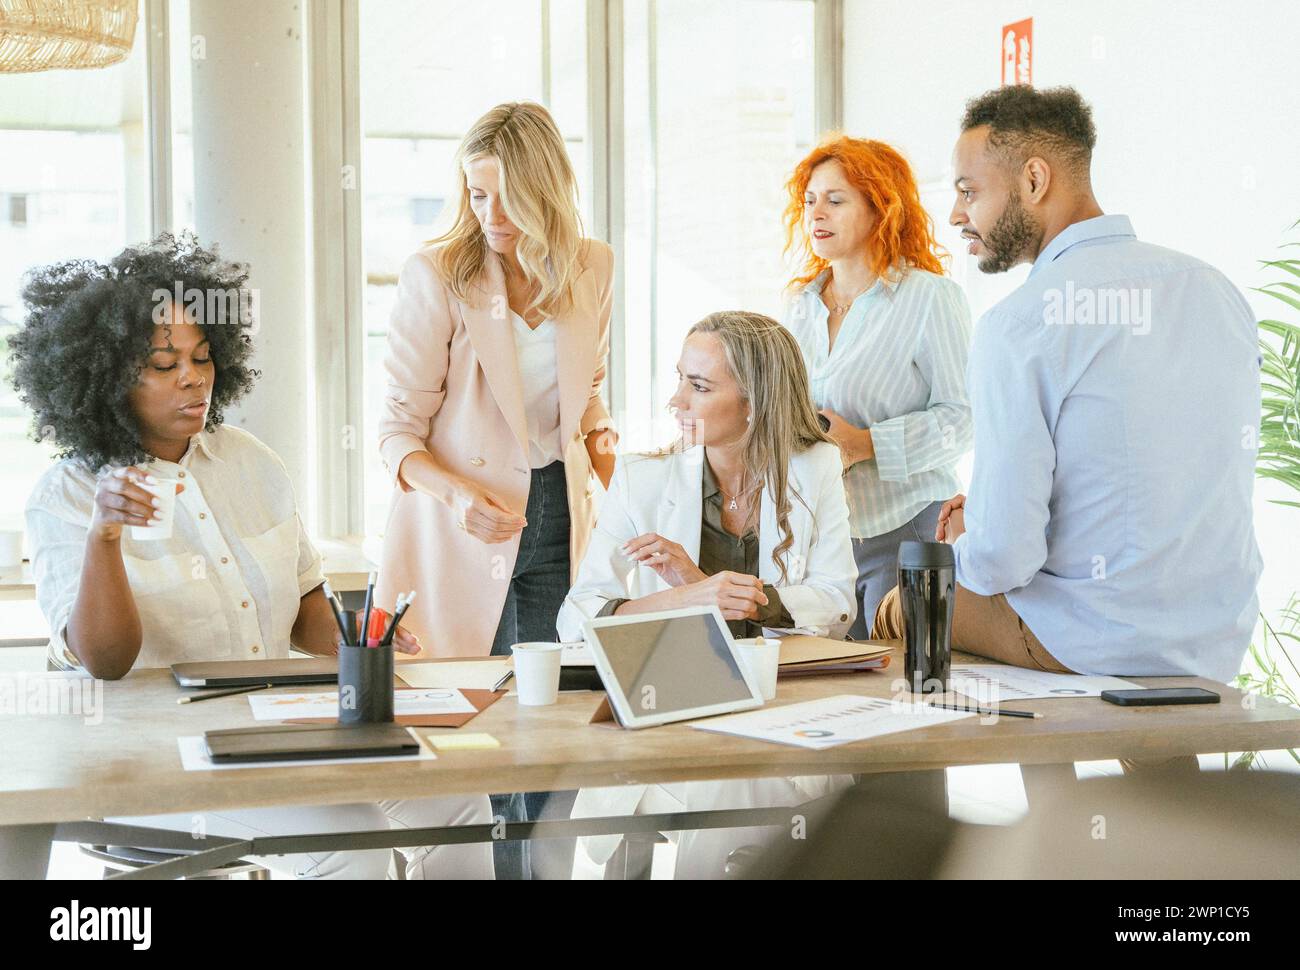 Businesswoman talking to her colleagues while gathering in the meeting room. Business concept. Stock Photo